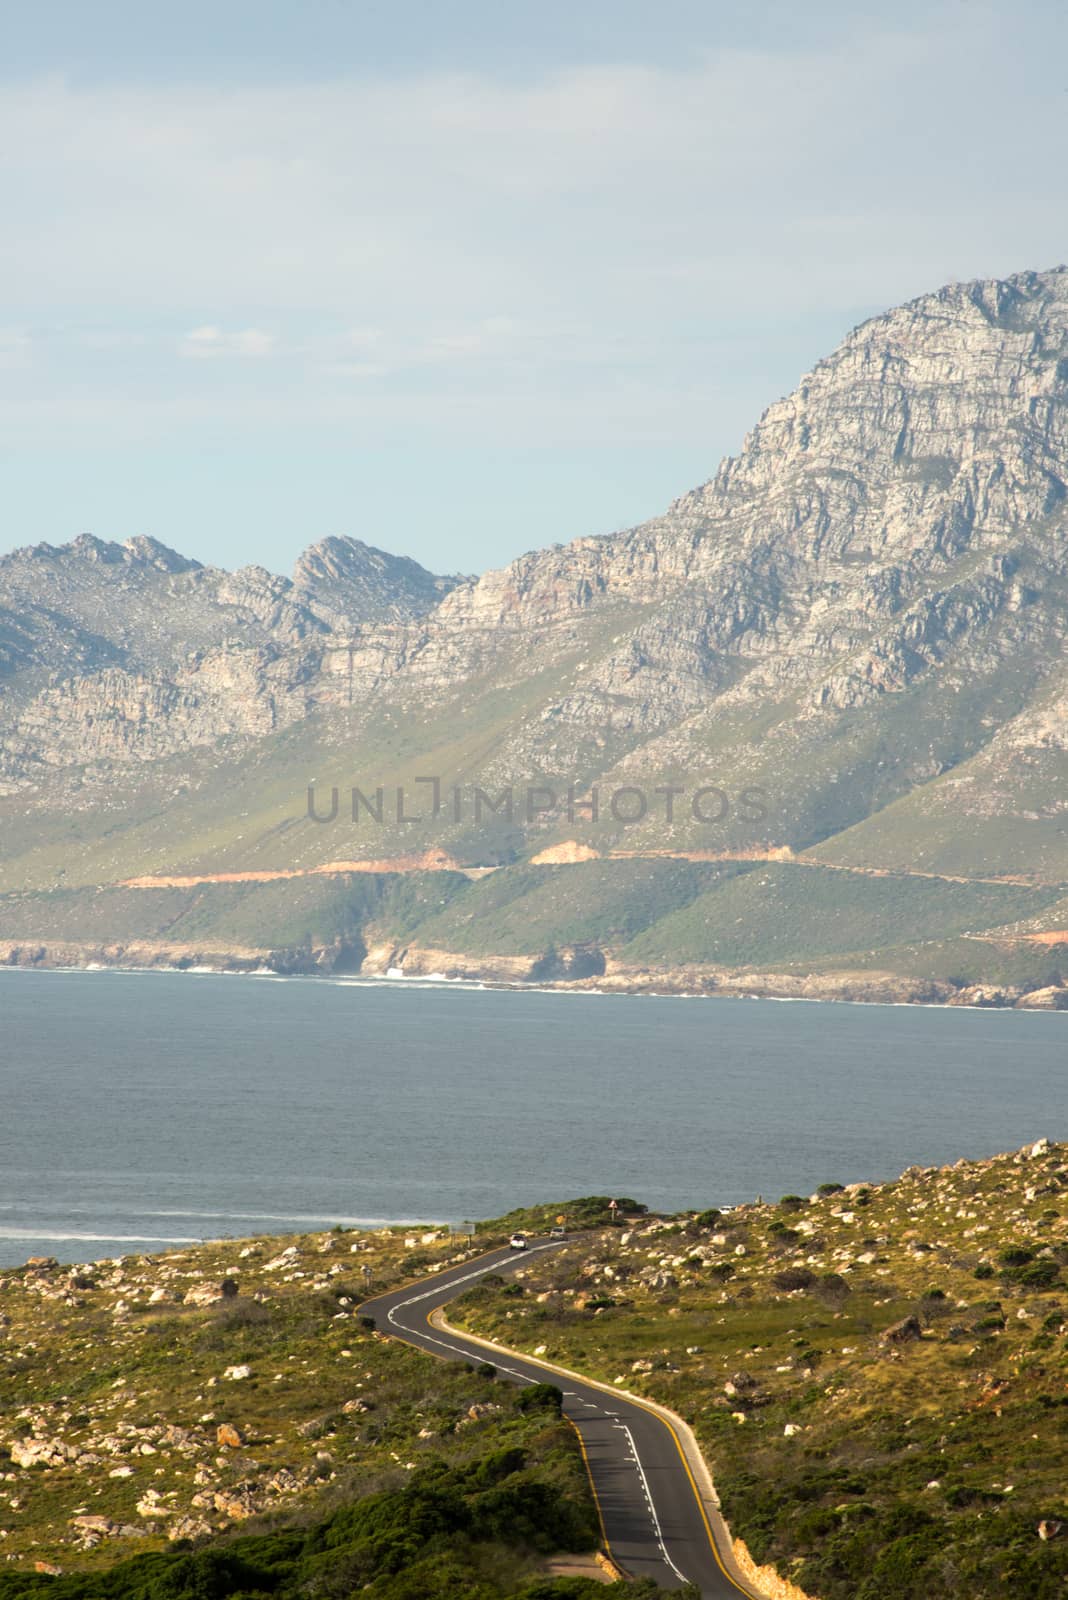 Late Afternoon in False Bay by JFJacobsz